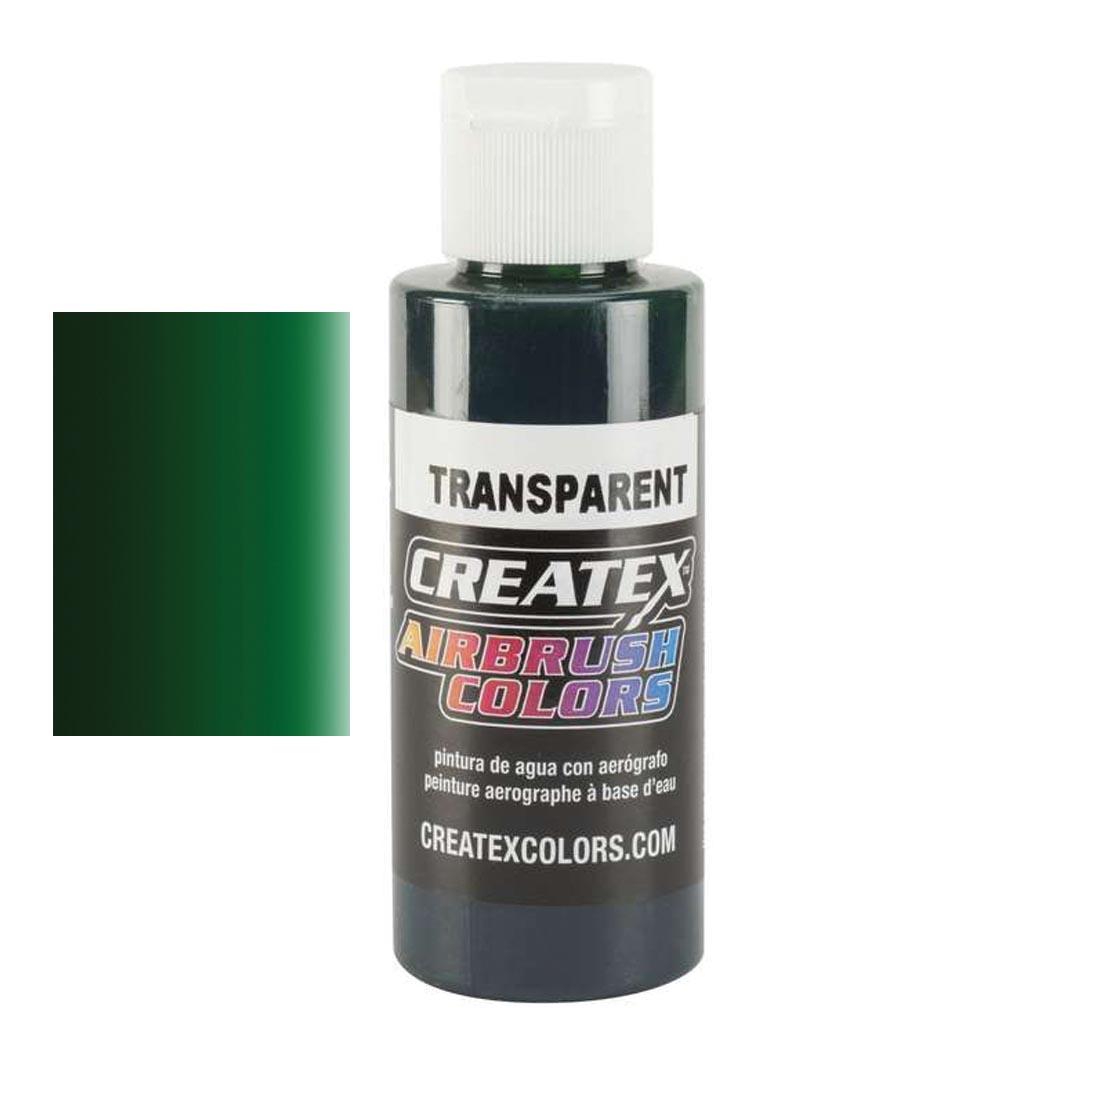 Bottle of Createx Airbrush Color Beside Transparent Forest Green Color Swatch